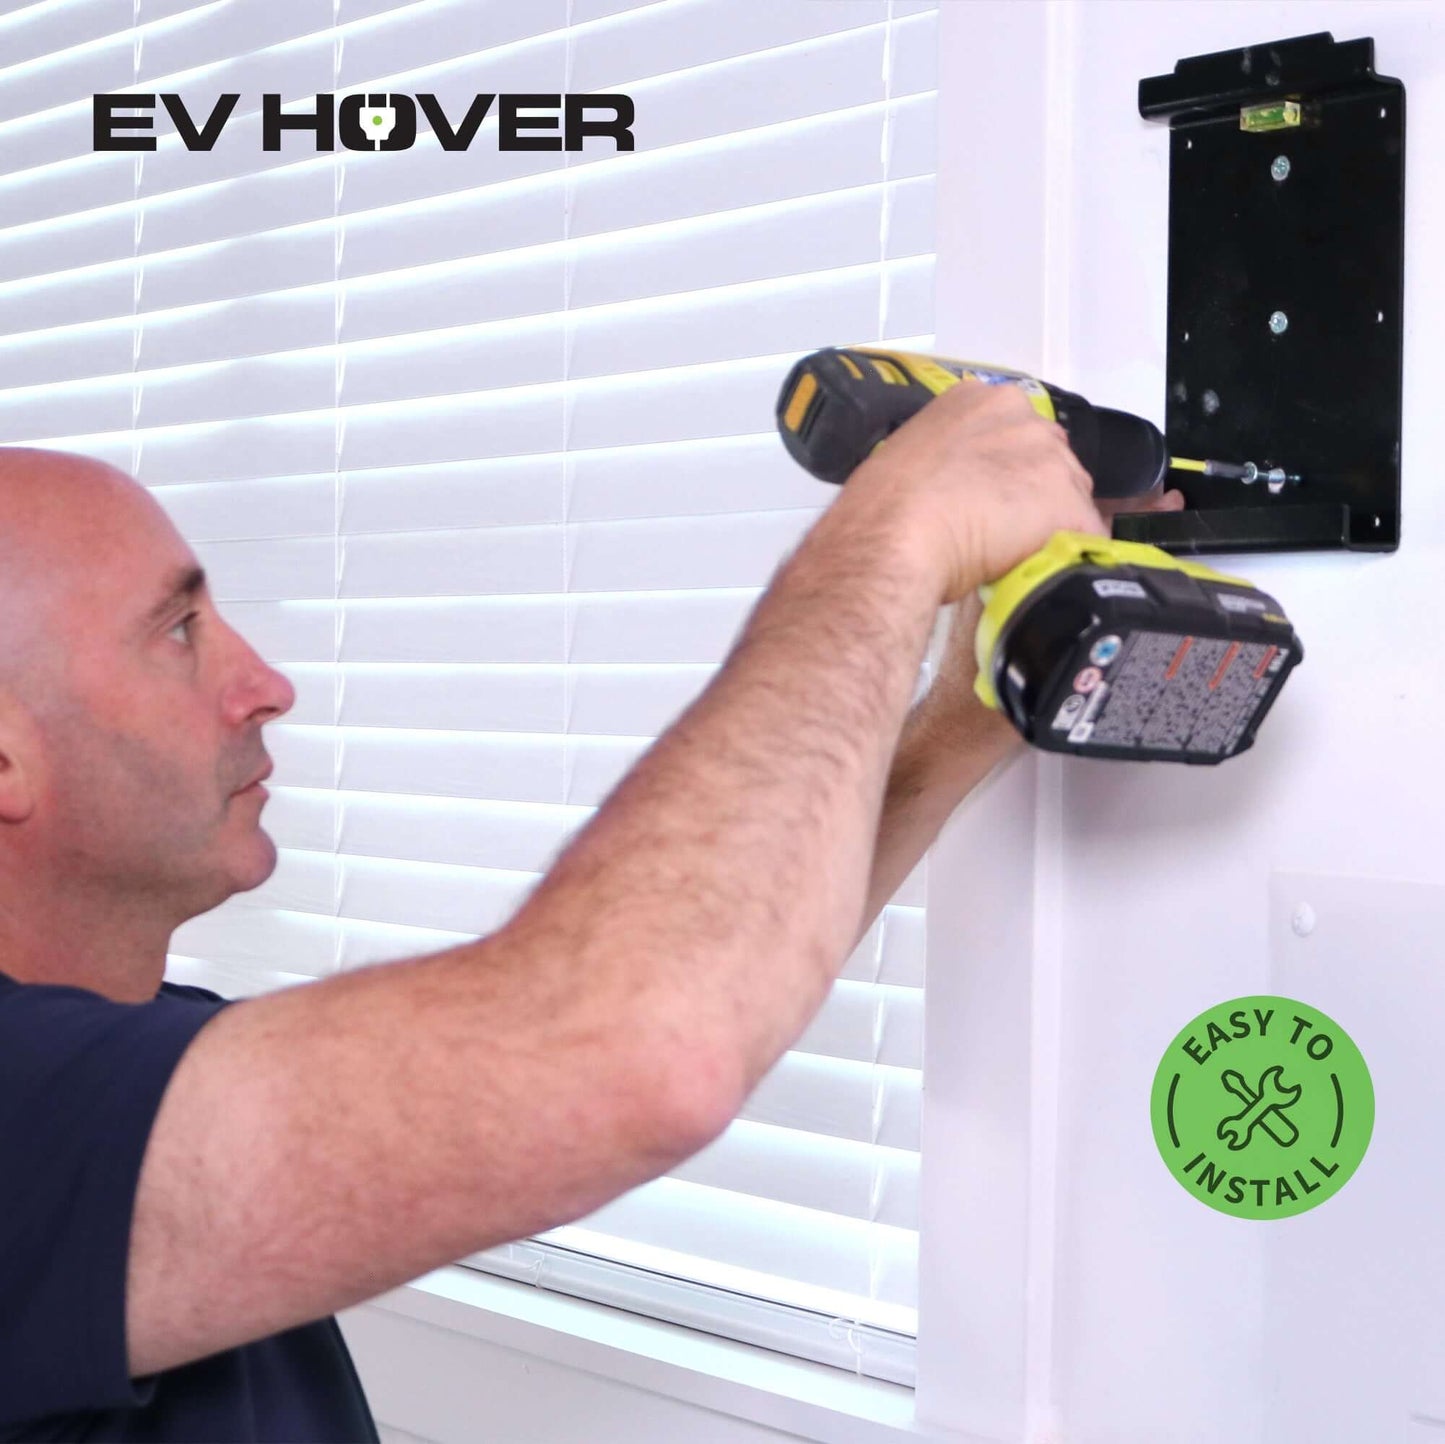 EV Hover - Easy to Install